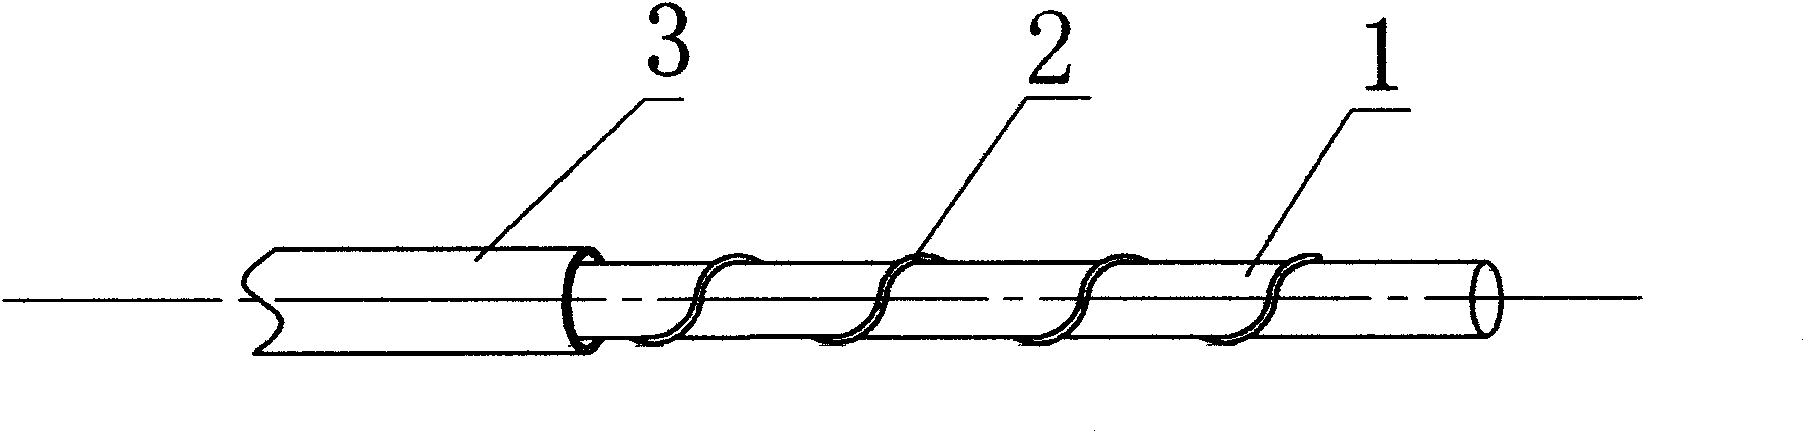 Pressure-sensitive optical cable with armor layer